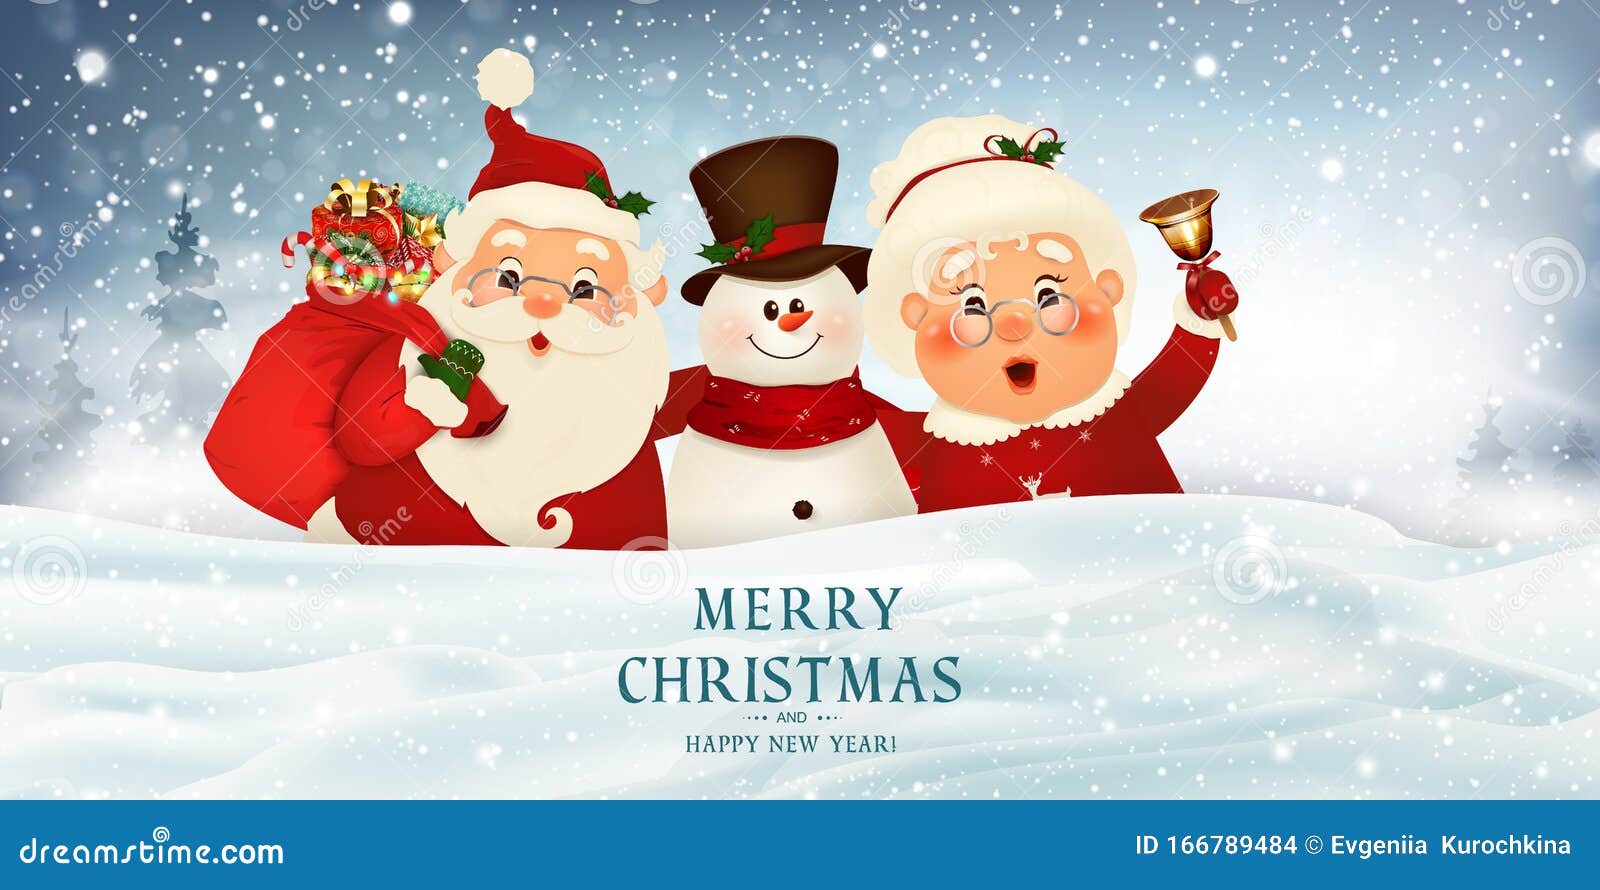 Download Merry Christmas. Happy New Year. Mrs. Claus Together ...